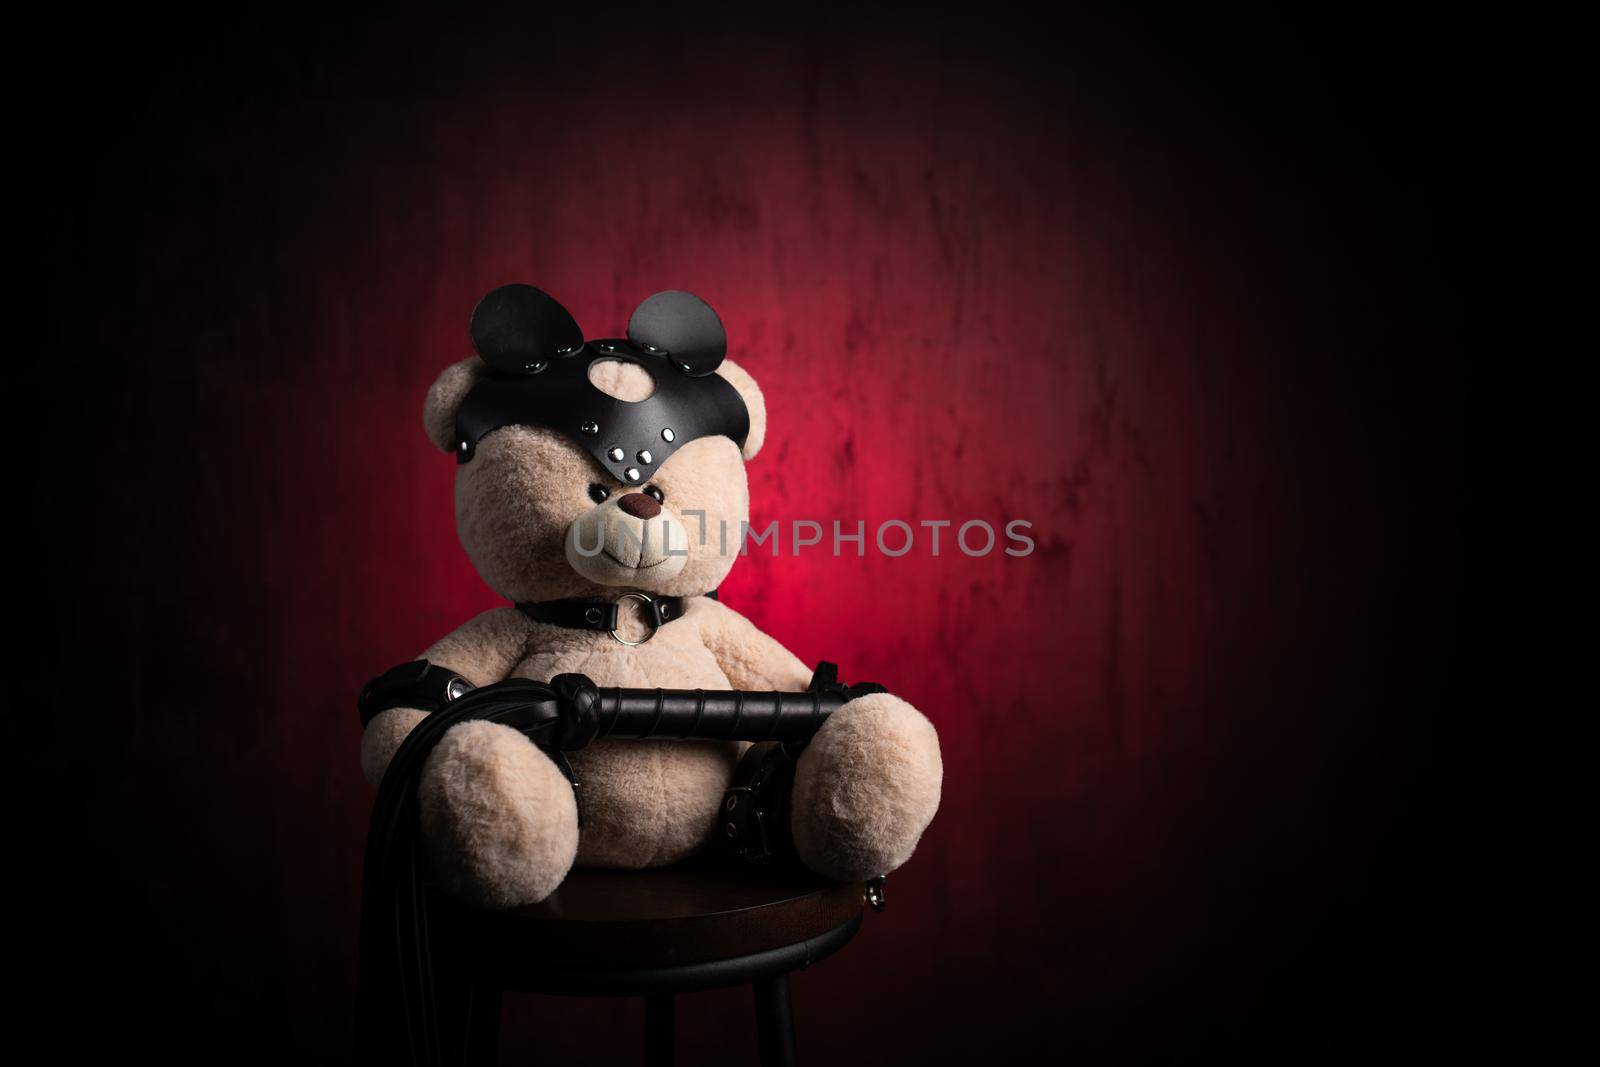 the toy teddy bear dressed in leather belts and a mask, an accessory for BDSM games on a dark red texture background